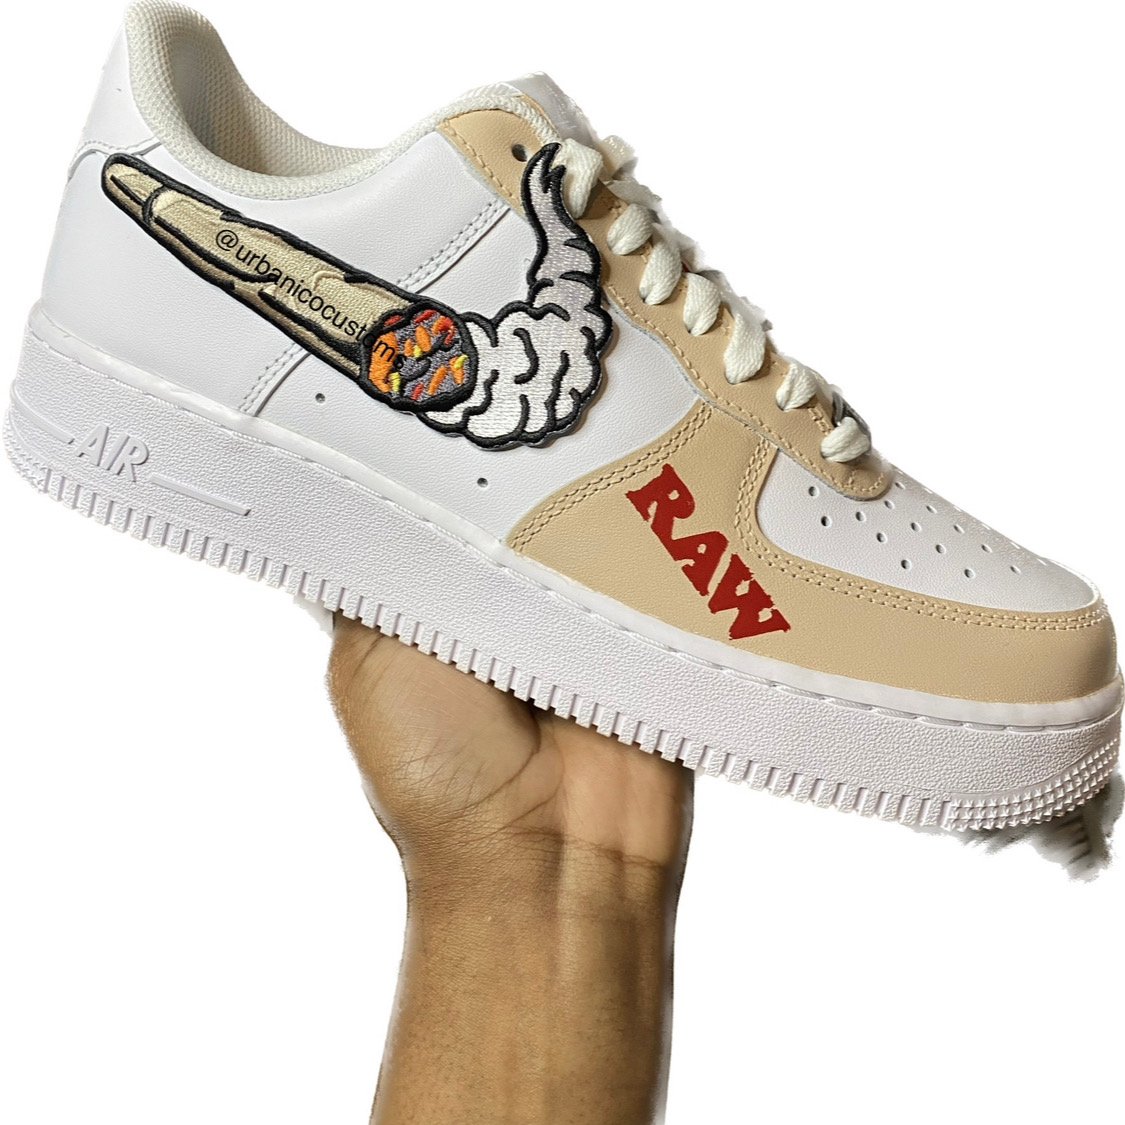 Custom Air Force 1 - RAW with Blunt Tick